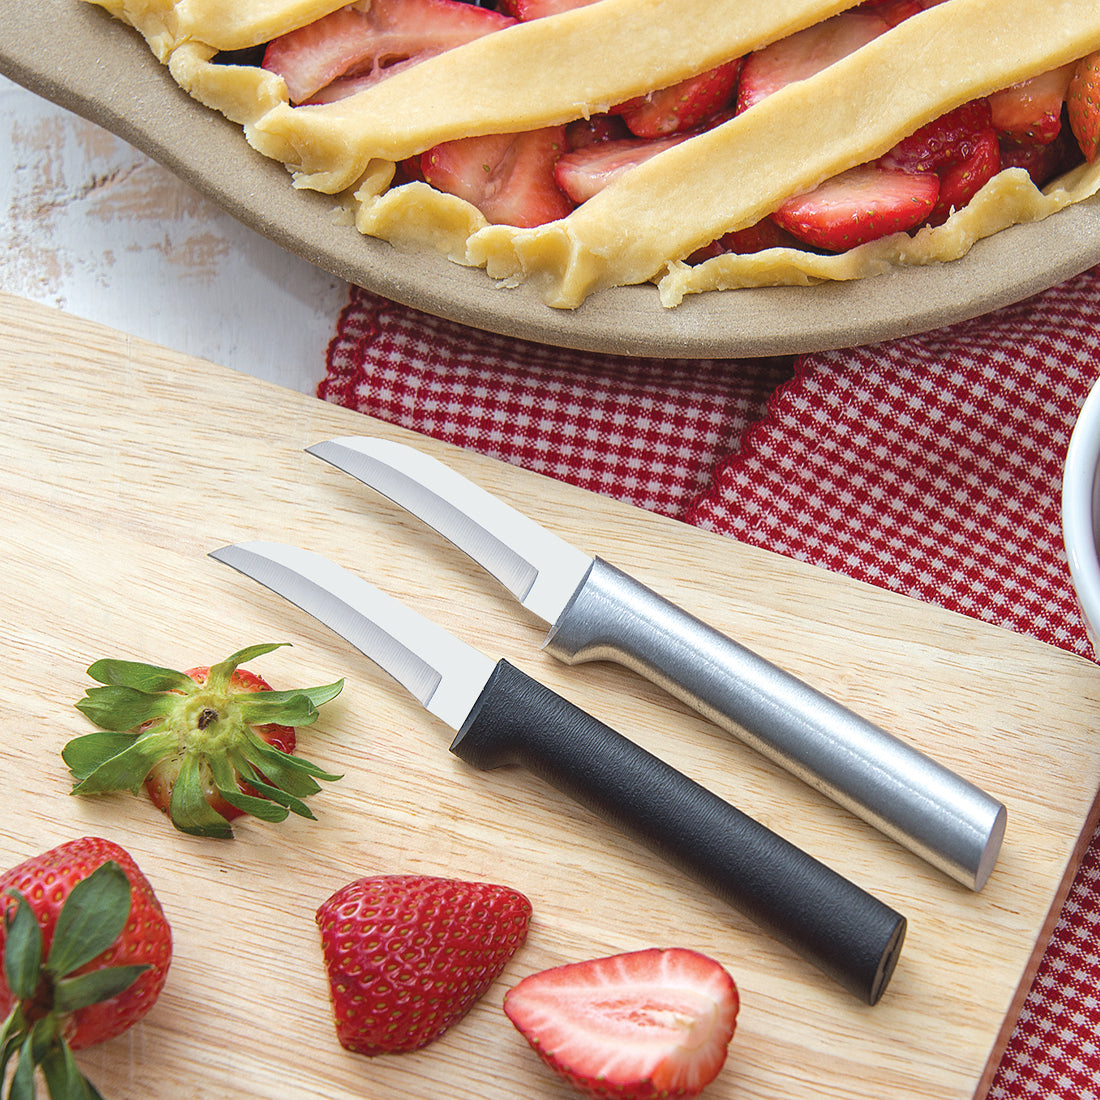 Stainless Steel Kitchen Paring Knife